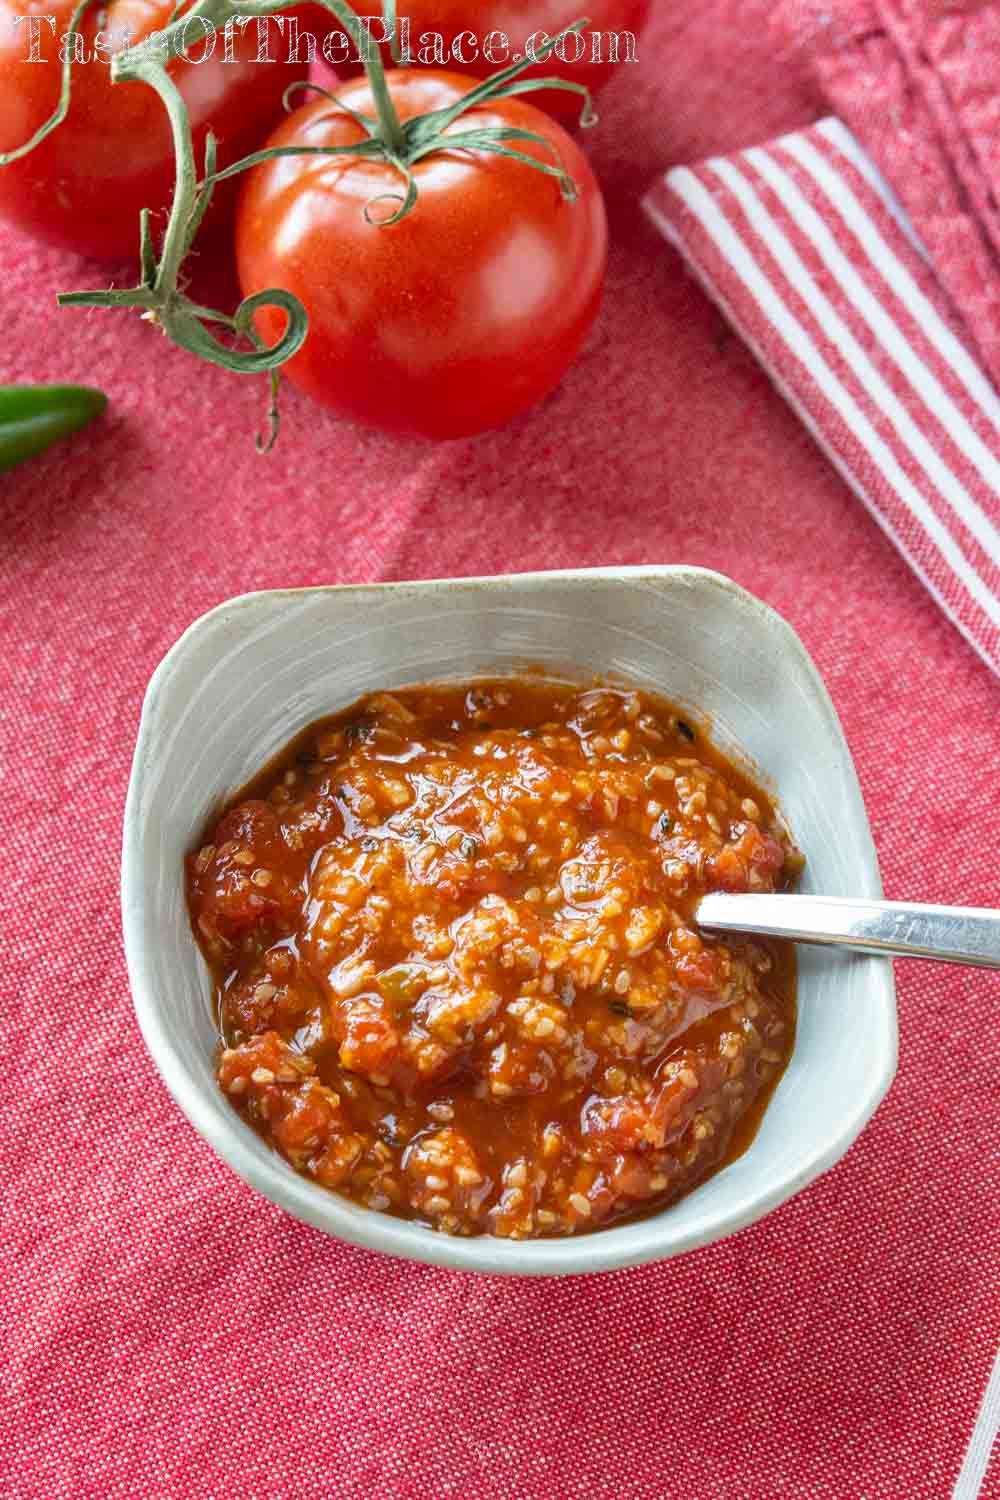 Tomato chutney with tomatoes and a pepper in the background